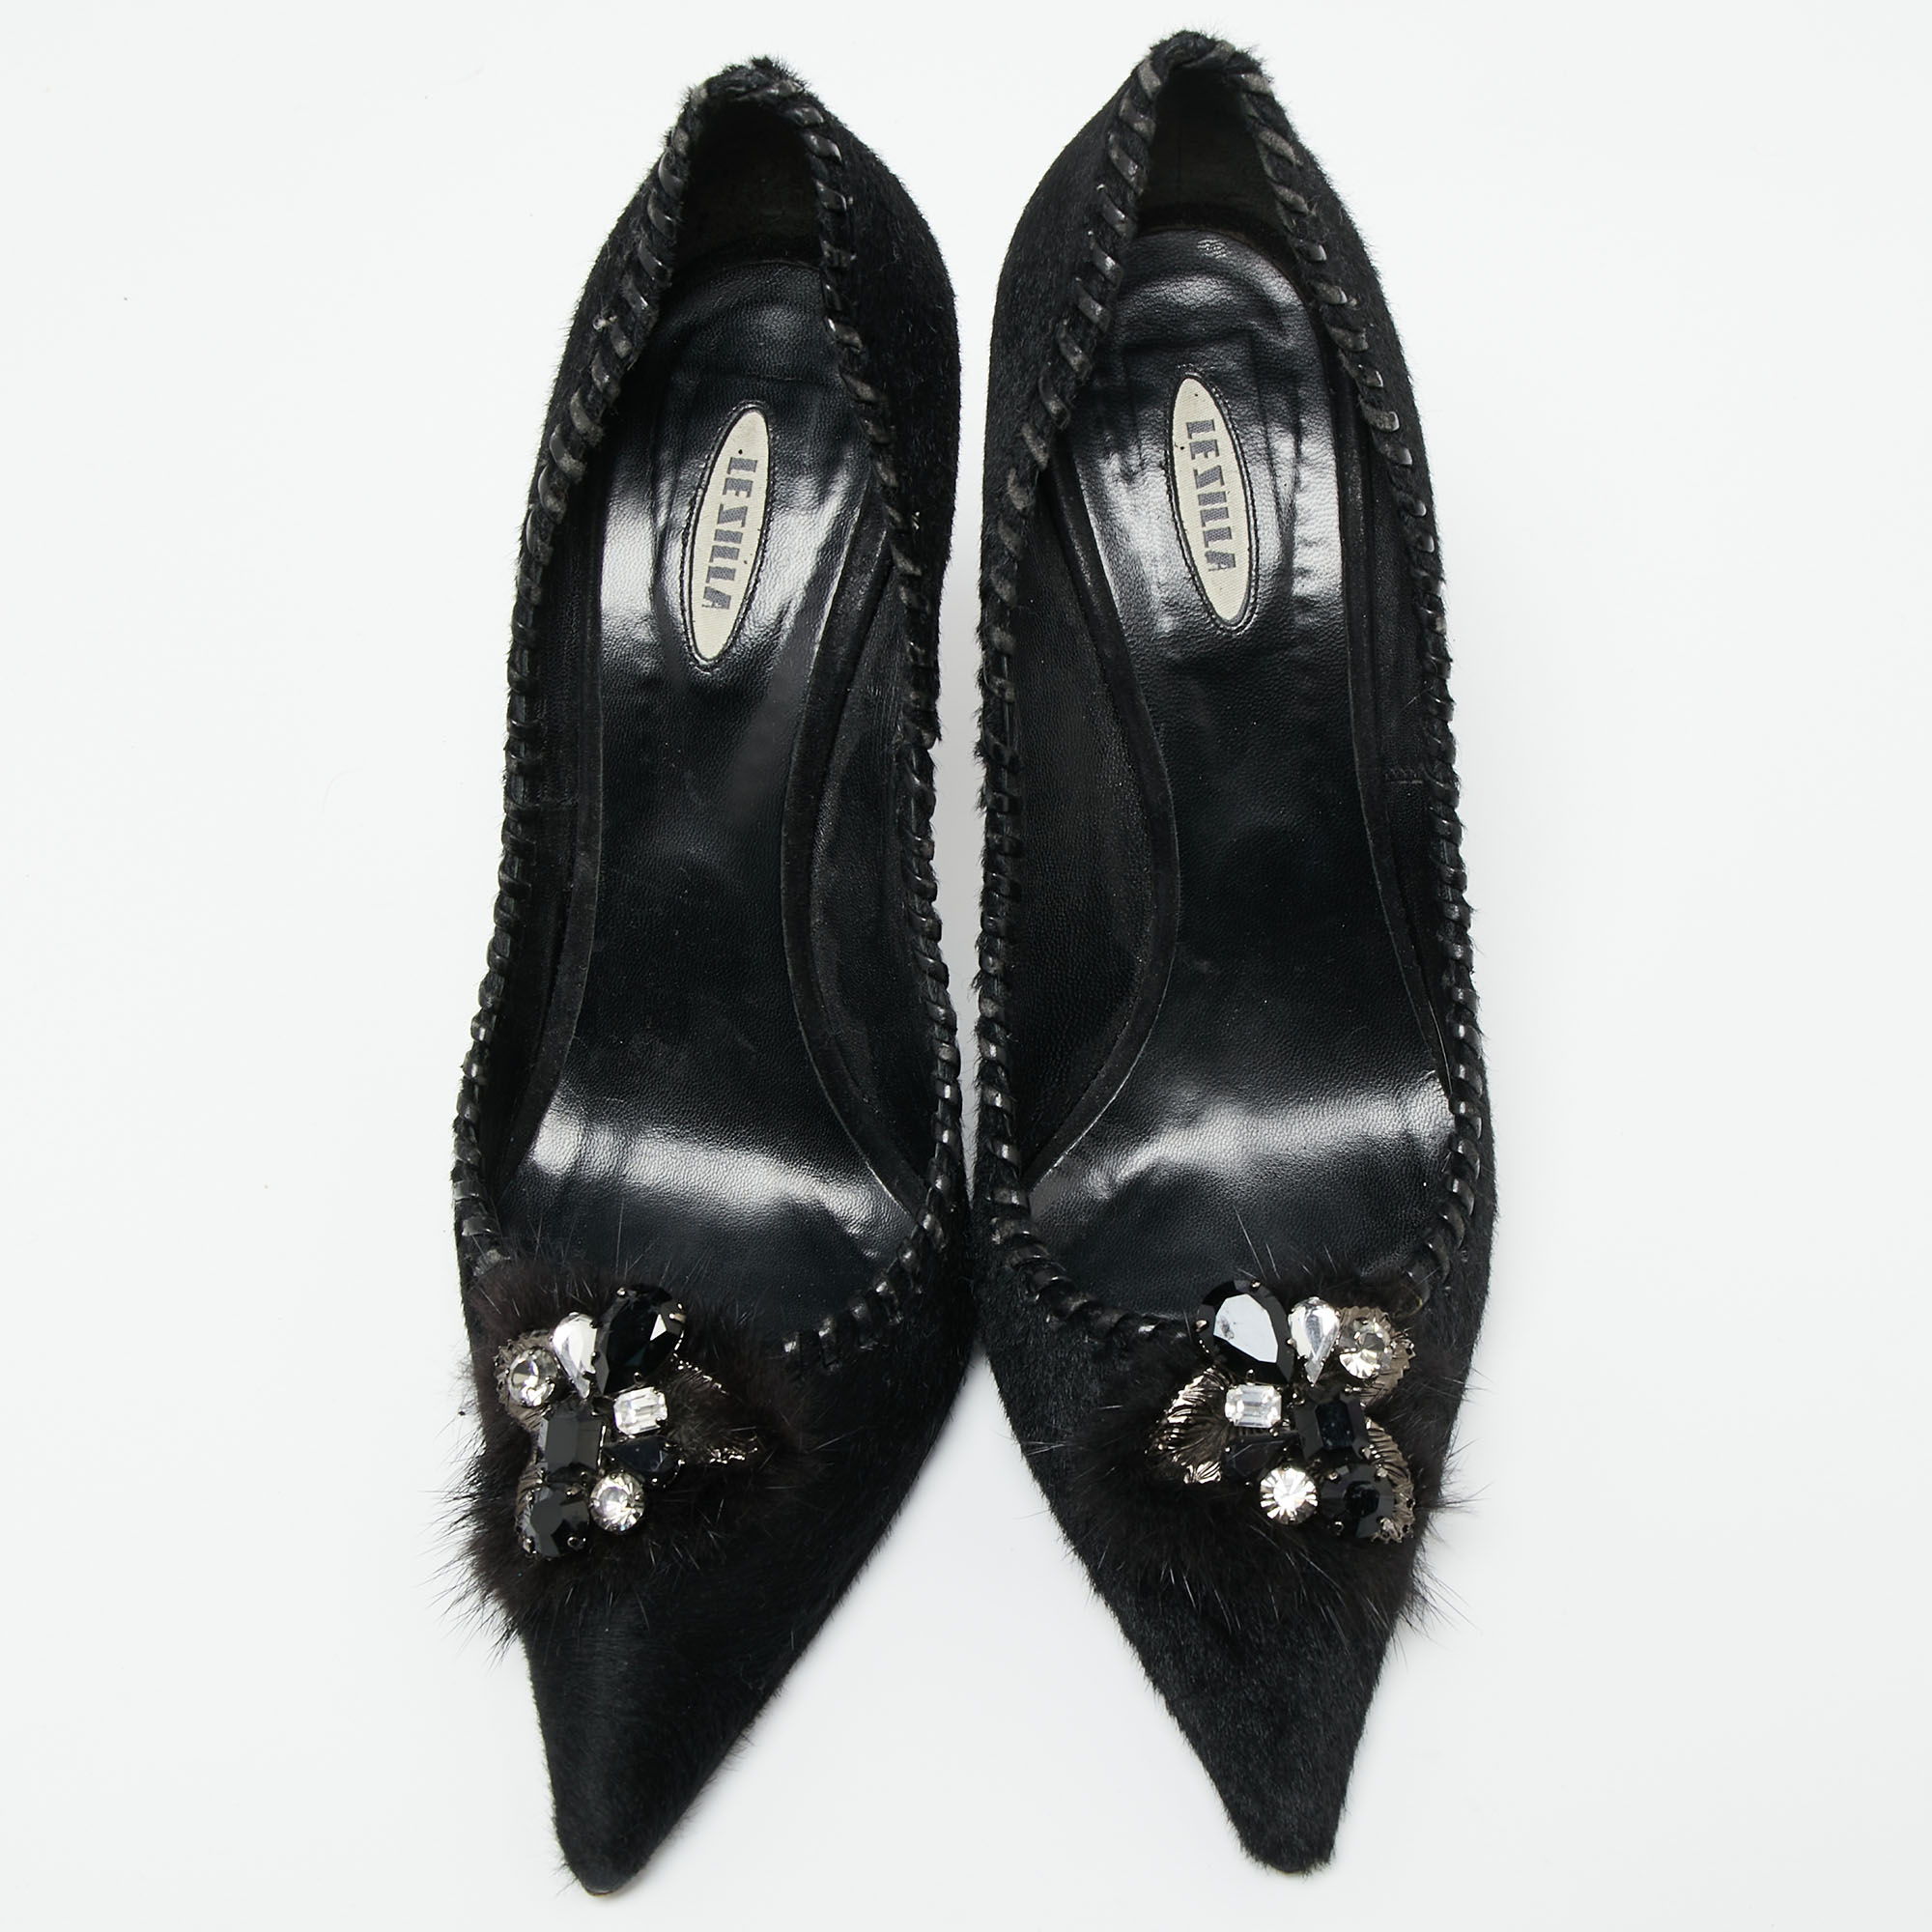 Le Silla Black Calf Hair Crystal Embellished Pointed Toe Pumps Size 38